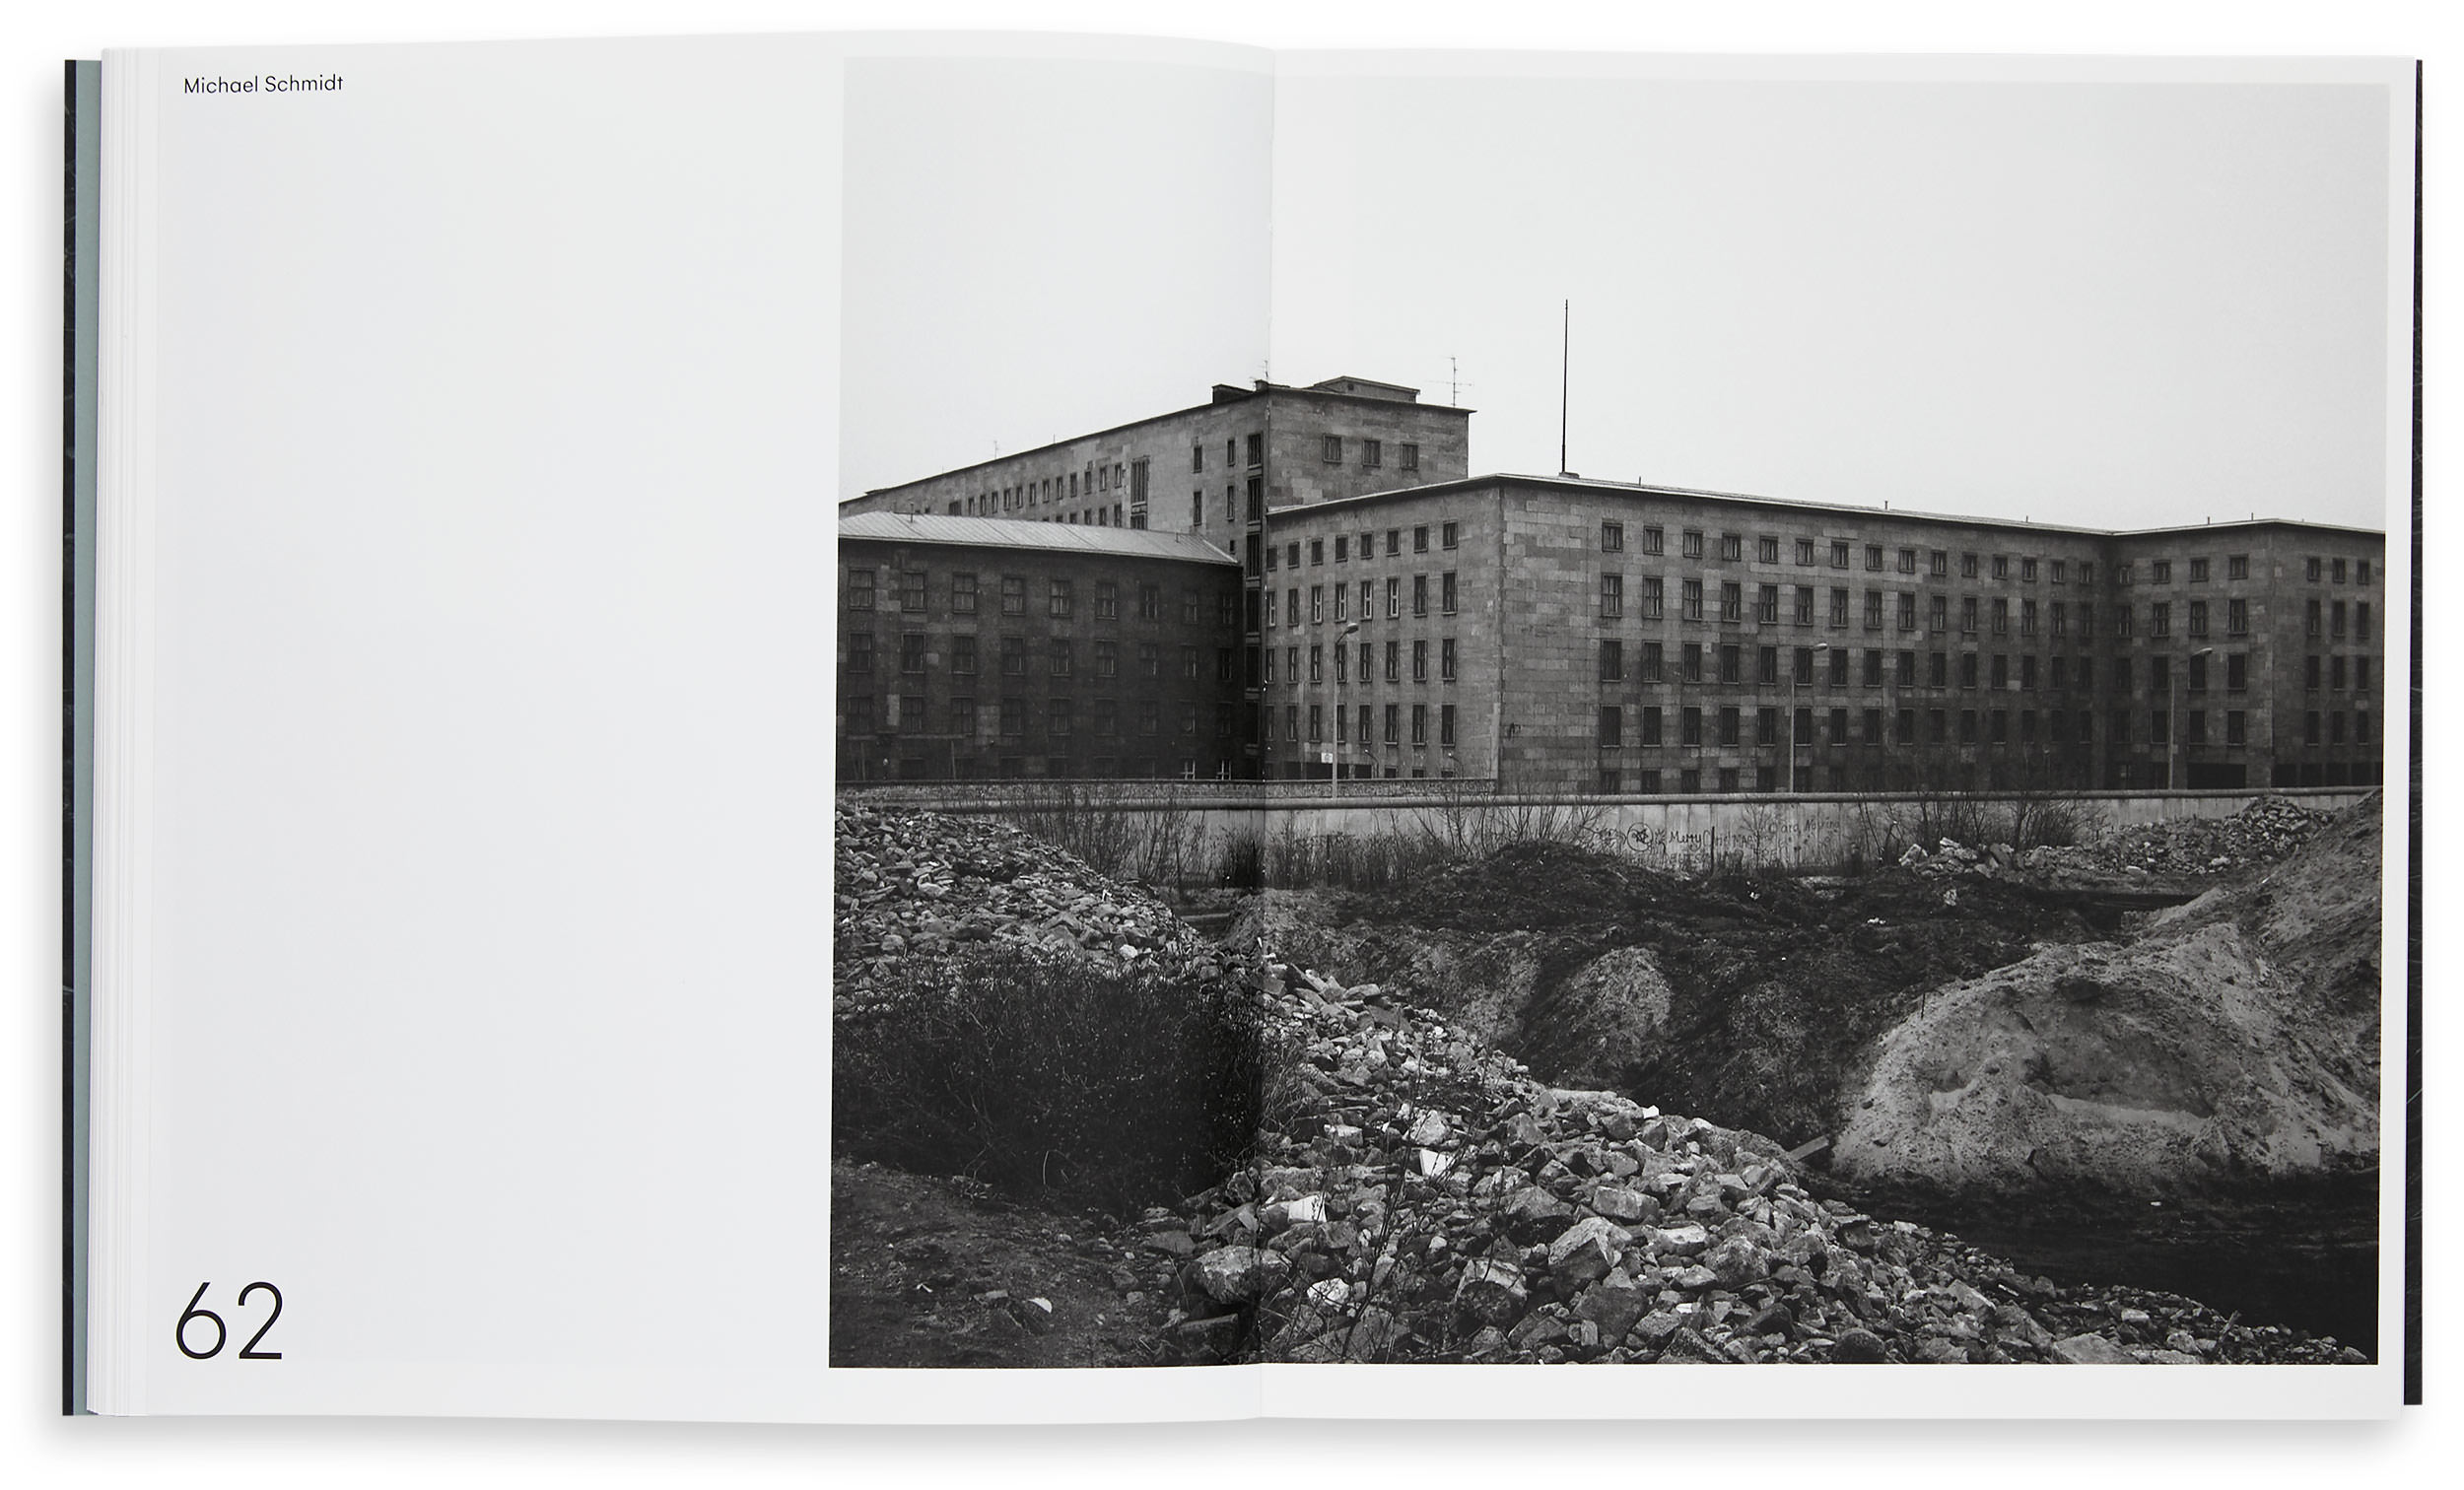 The “Topography of Terror” Site as Reflected in Contemporary Photography